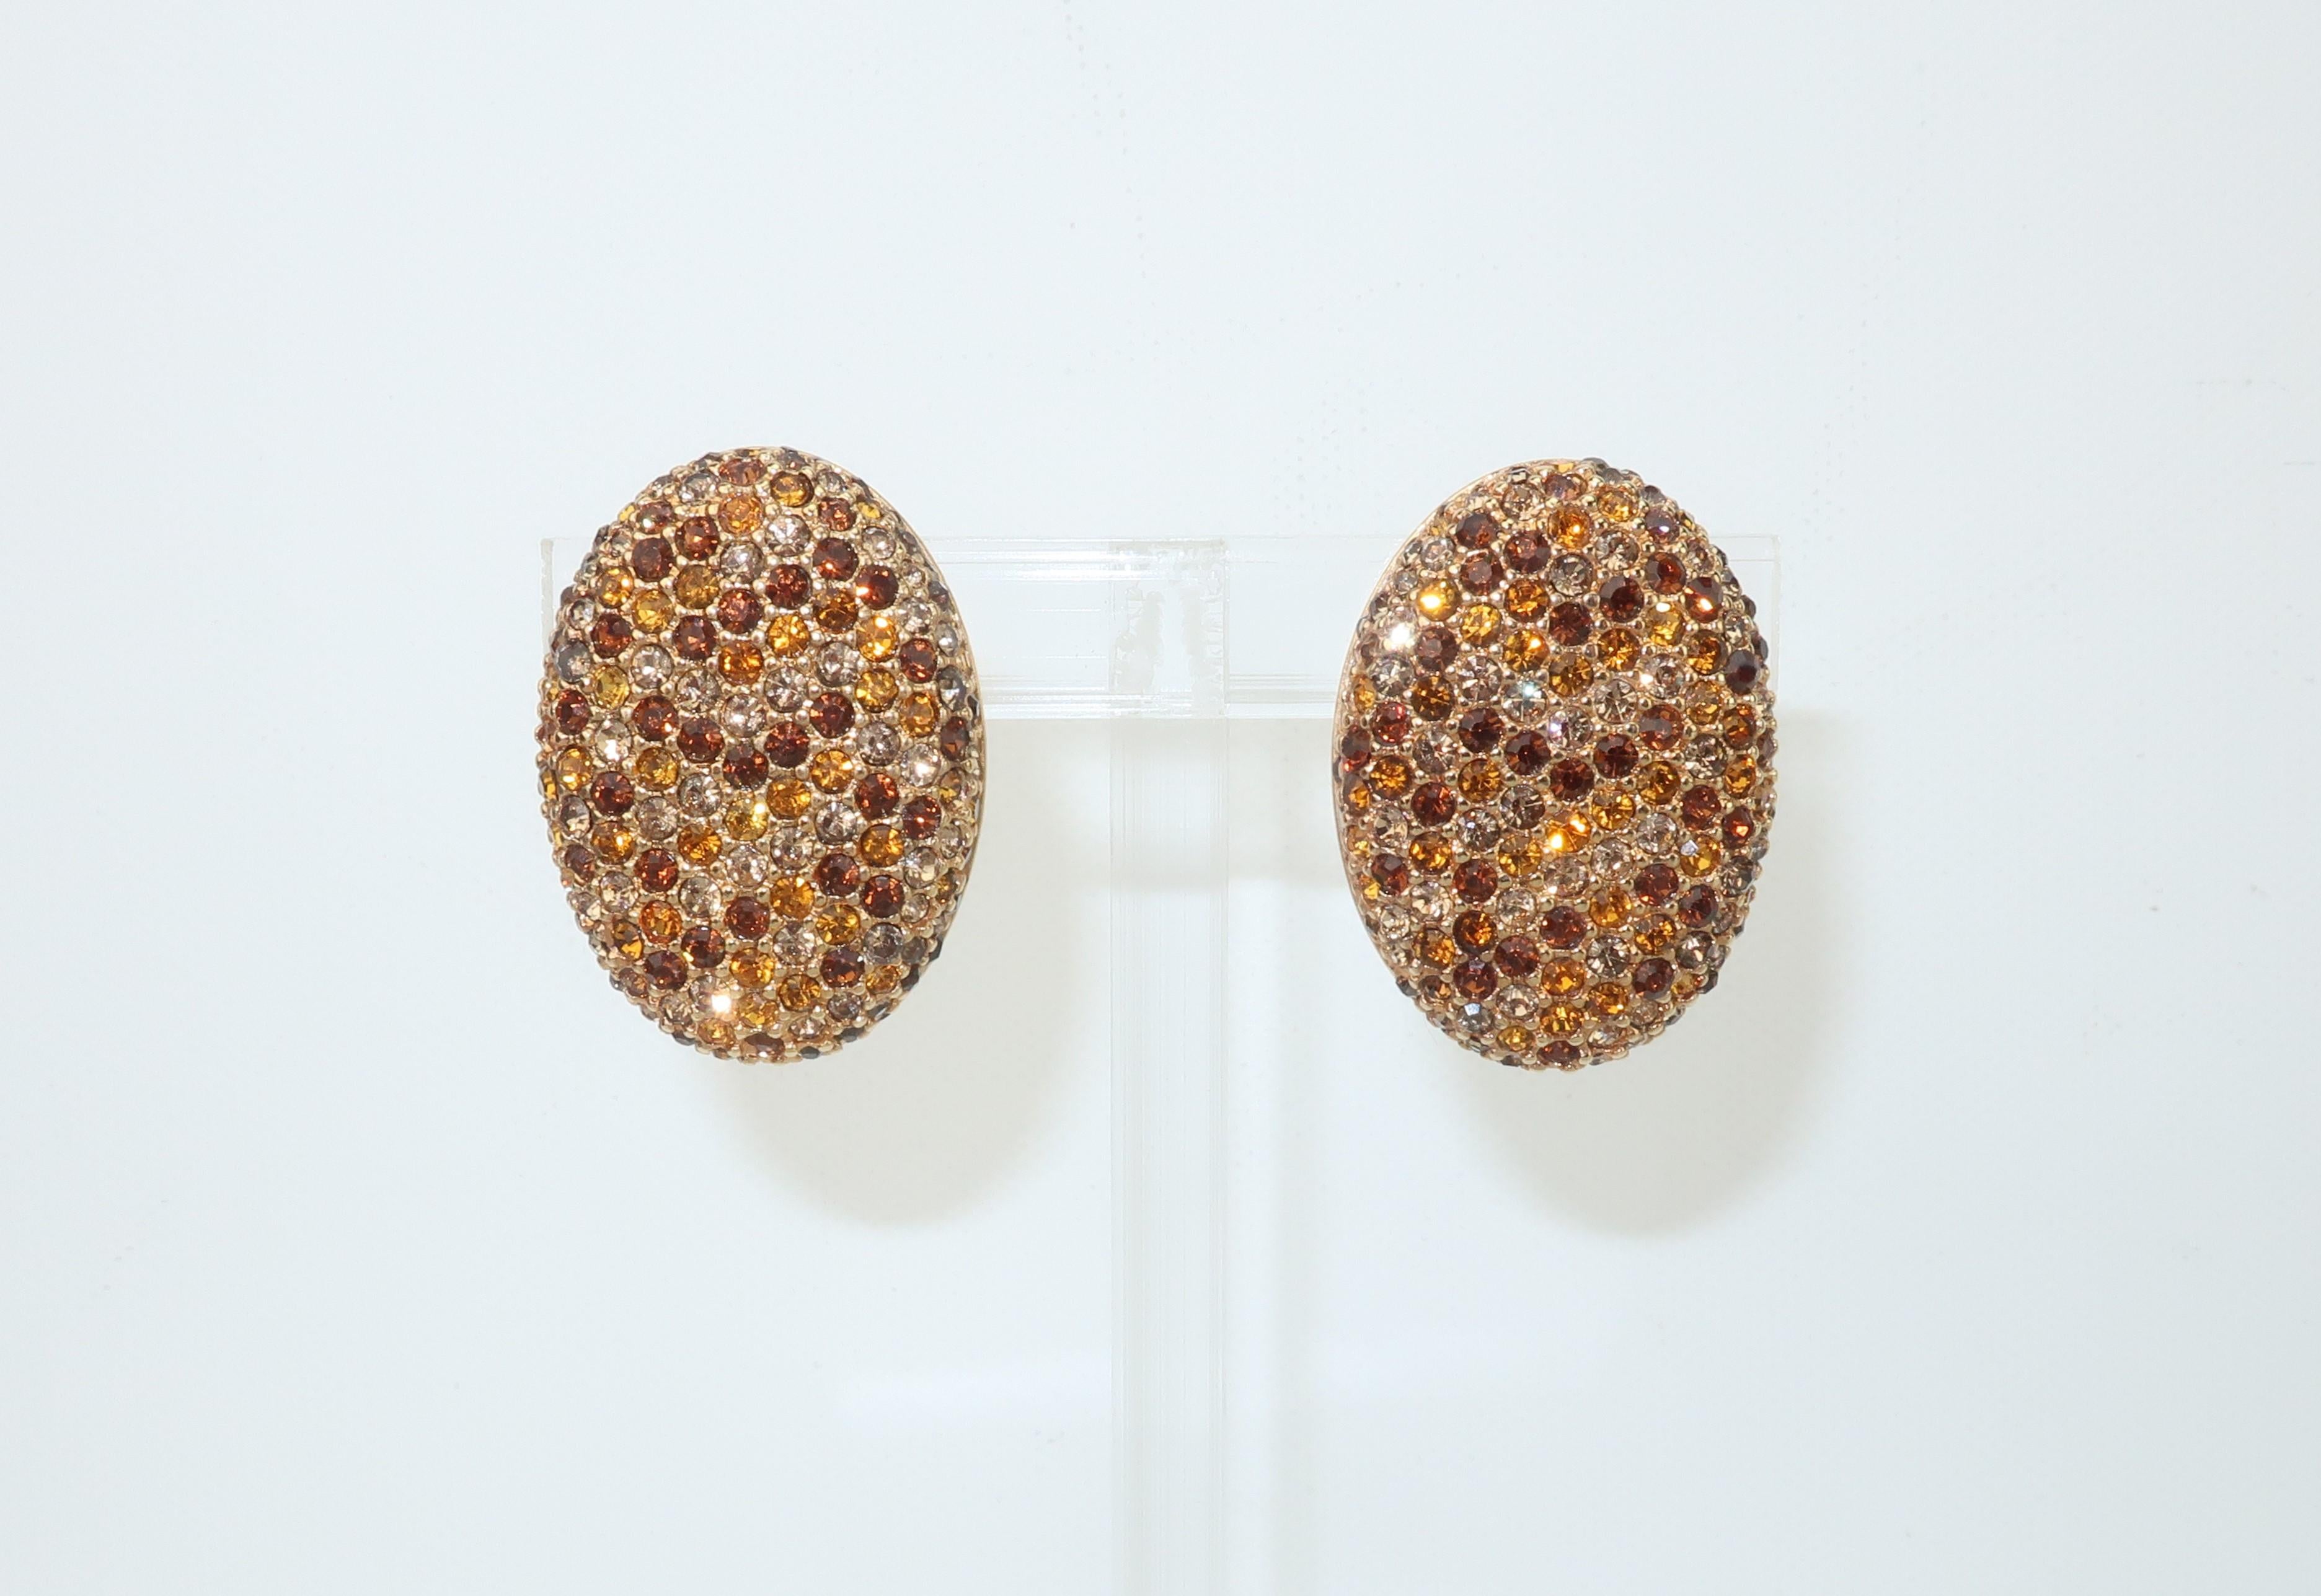 A beautiful pair of oval gold tone earrings fully embellished with Swarovski sparkling crystal rhinestones in shades of chocolate brown, amber and a grayish smoky topaz look.  The stones are set in a pattern that takes on the appearance of a